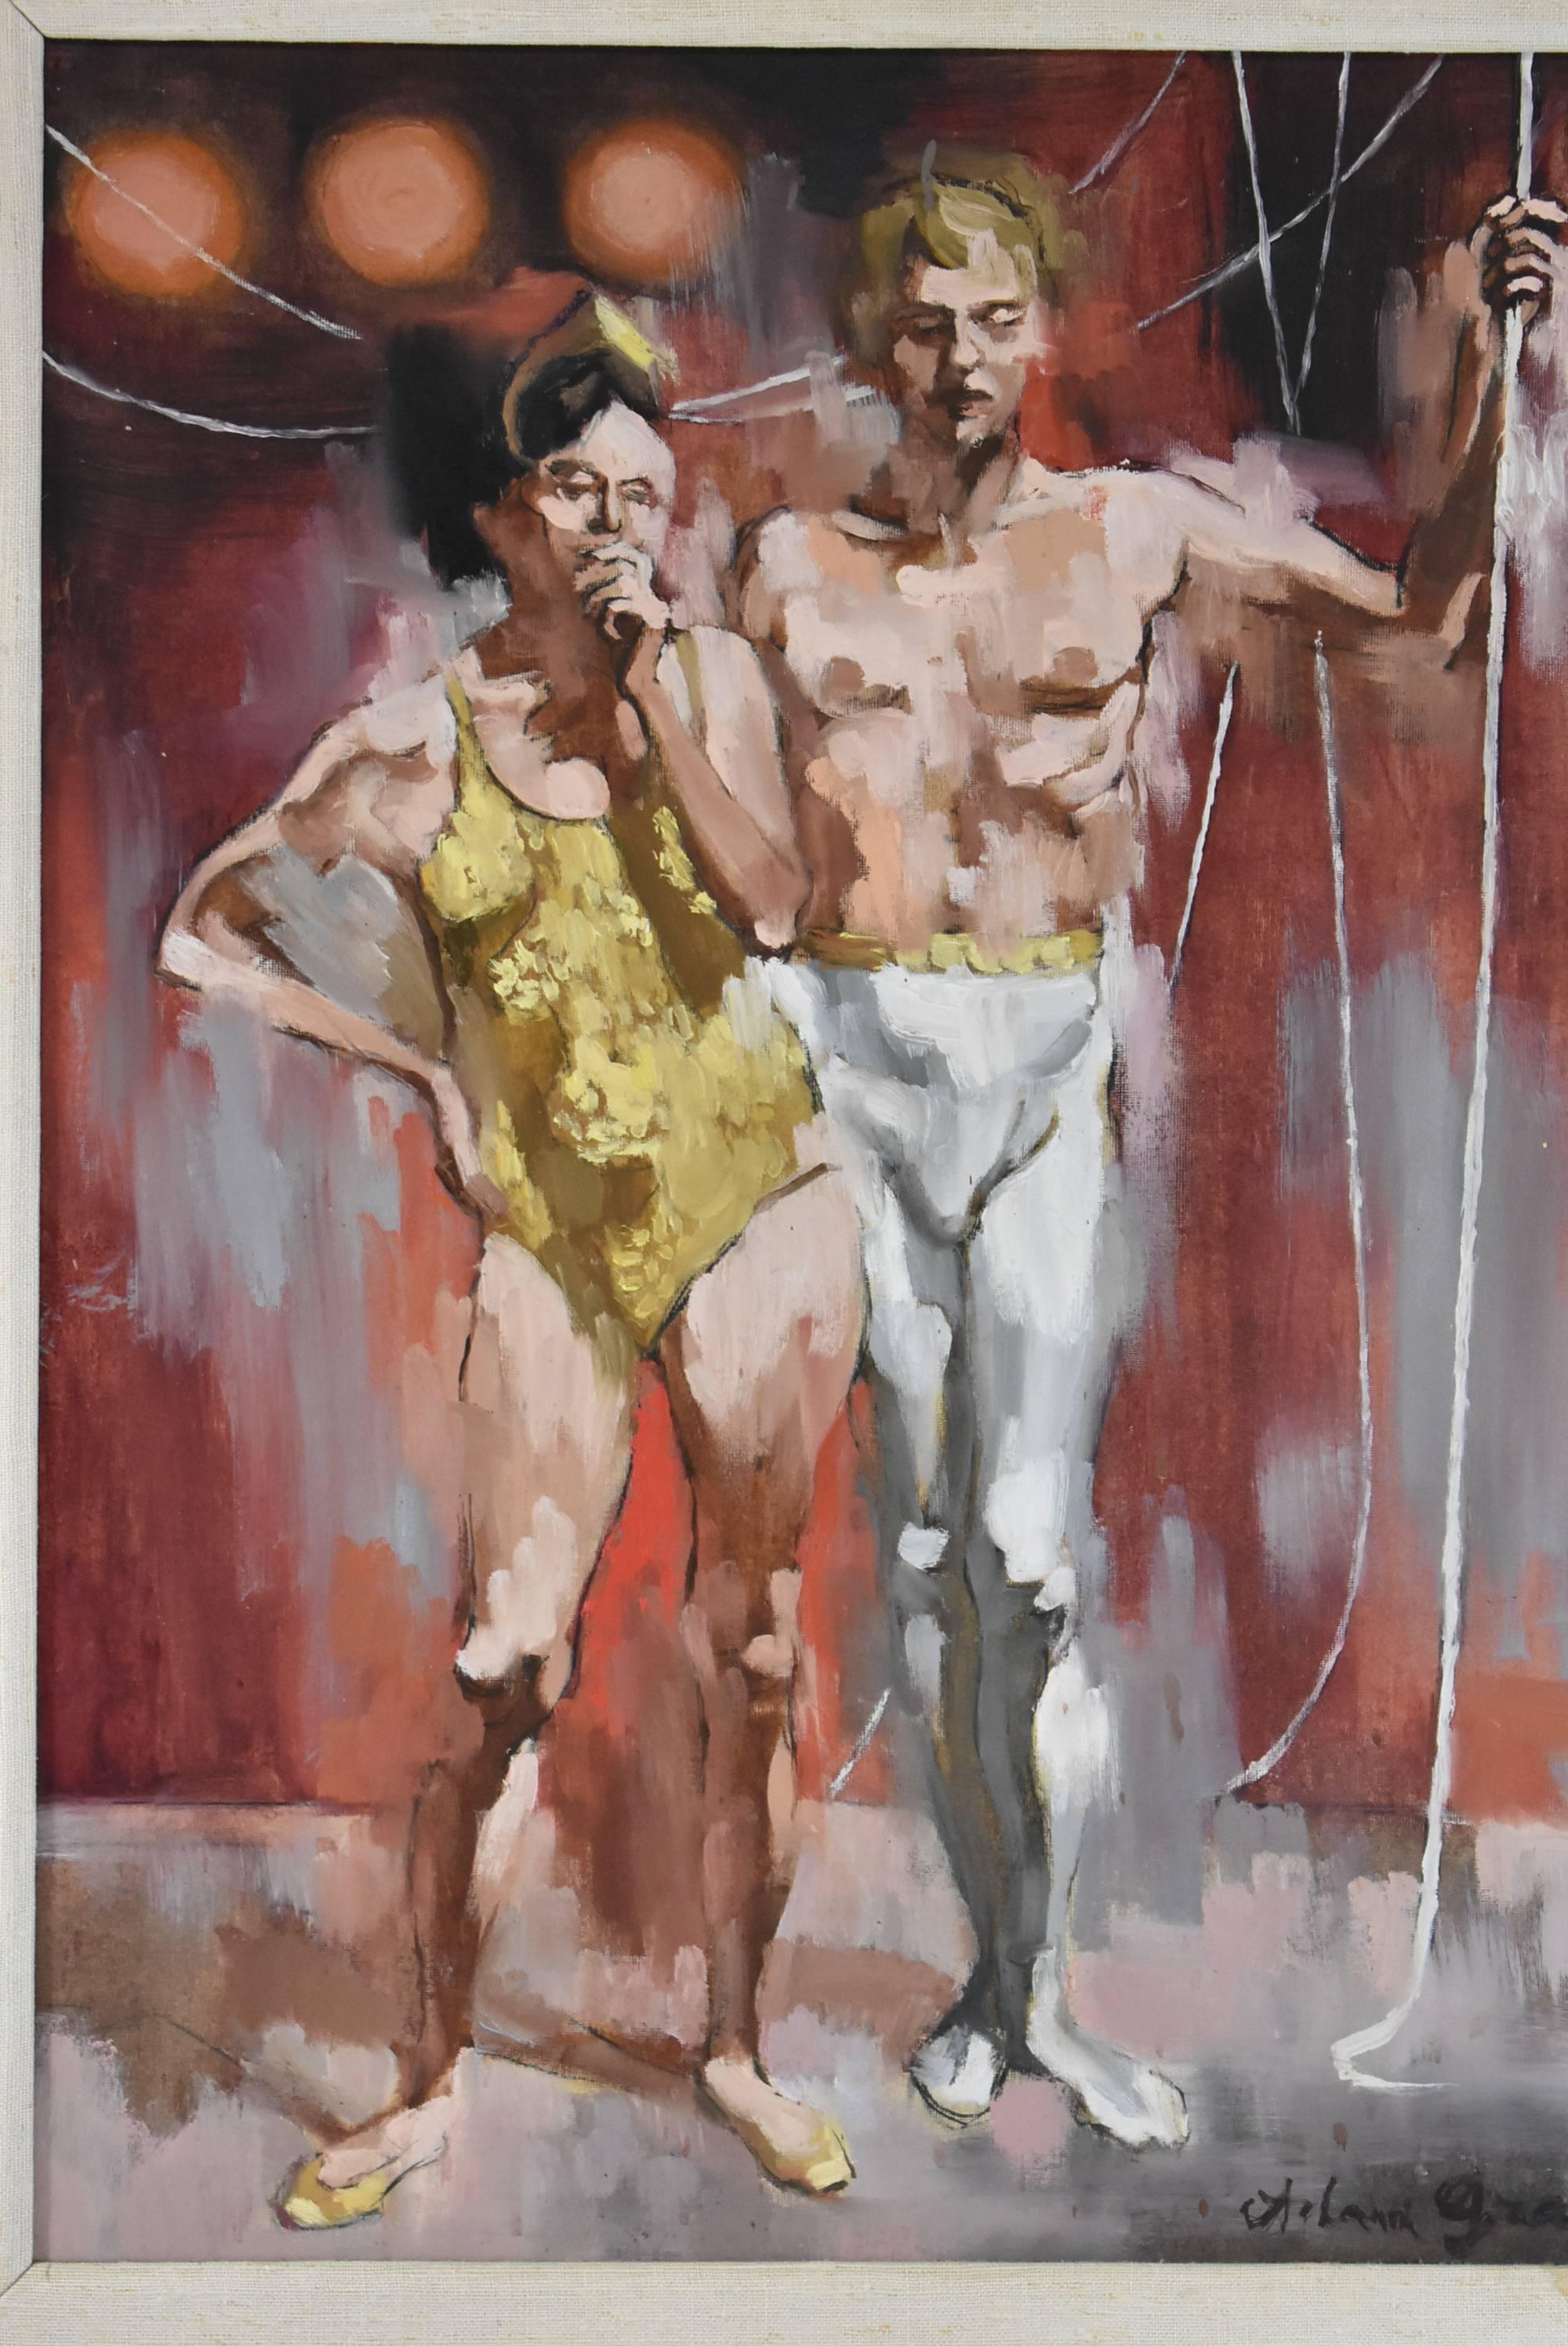 A great oil on board by Adam Grant. This work is titled “Circus Couple” and shows two acrobatic performers. Artist signed in lower right hand corner. Original artist tag on the back from 1970s shows title and price at that time. Also attached to the